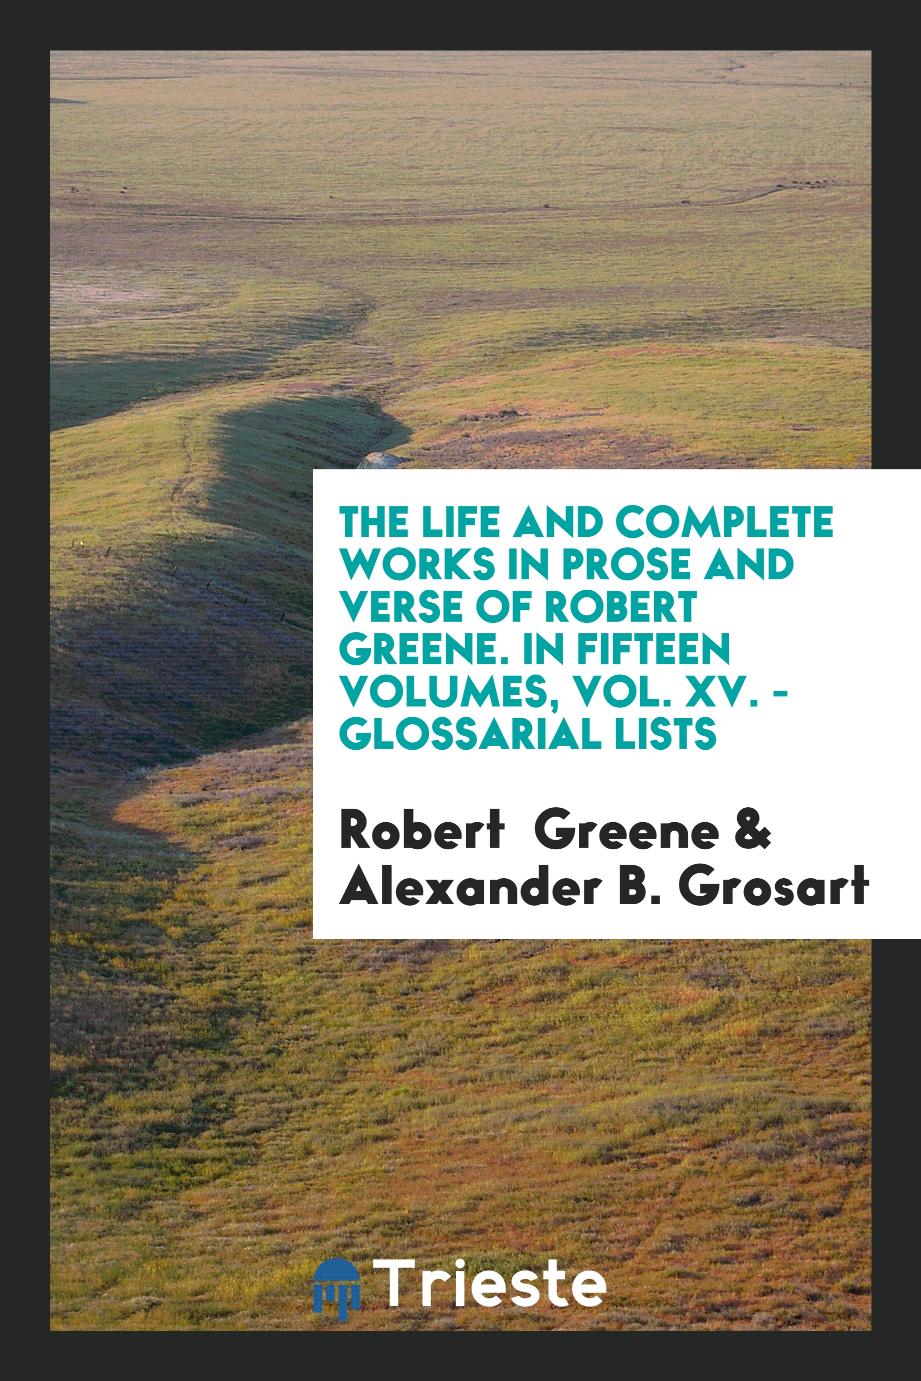 The Life and Complete Works in Prose and Verse of Robert Greene. In Fifteen Volumes, Vol. XV. - Glossarial Lists